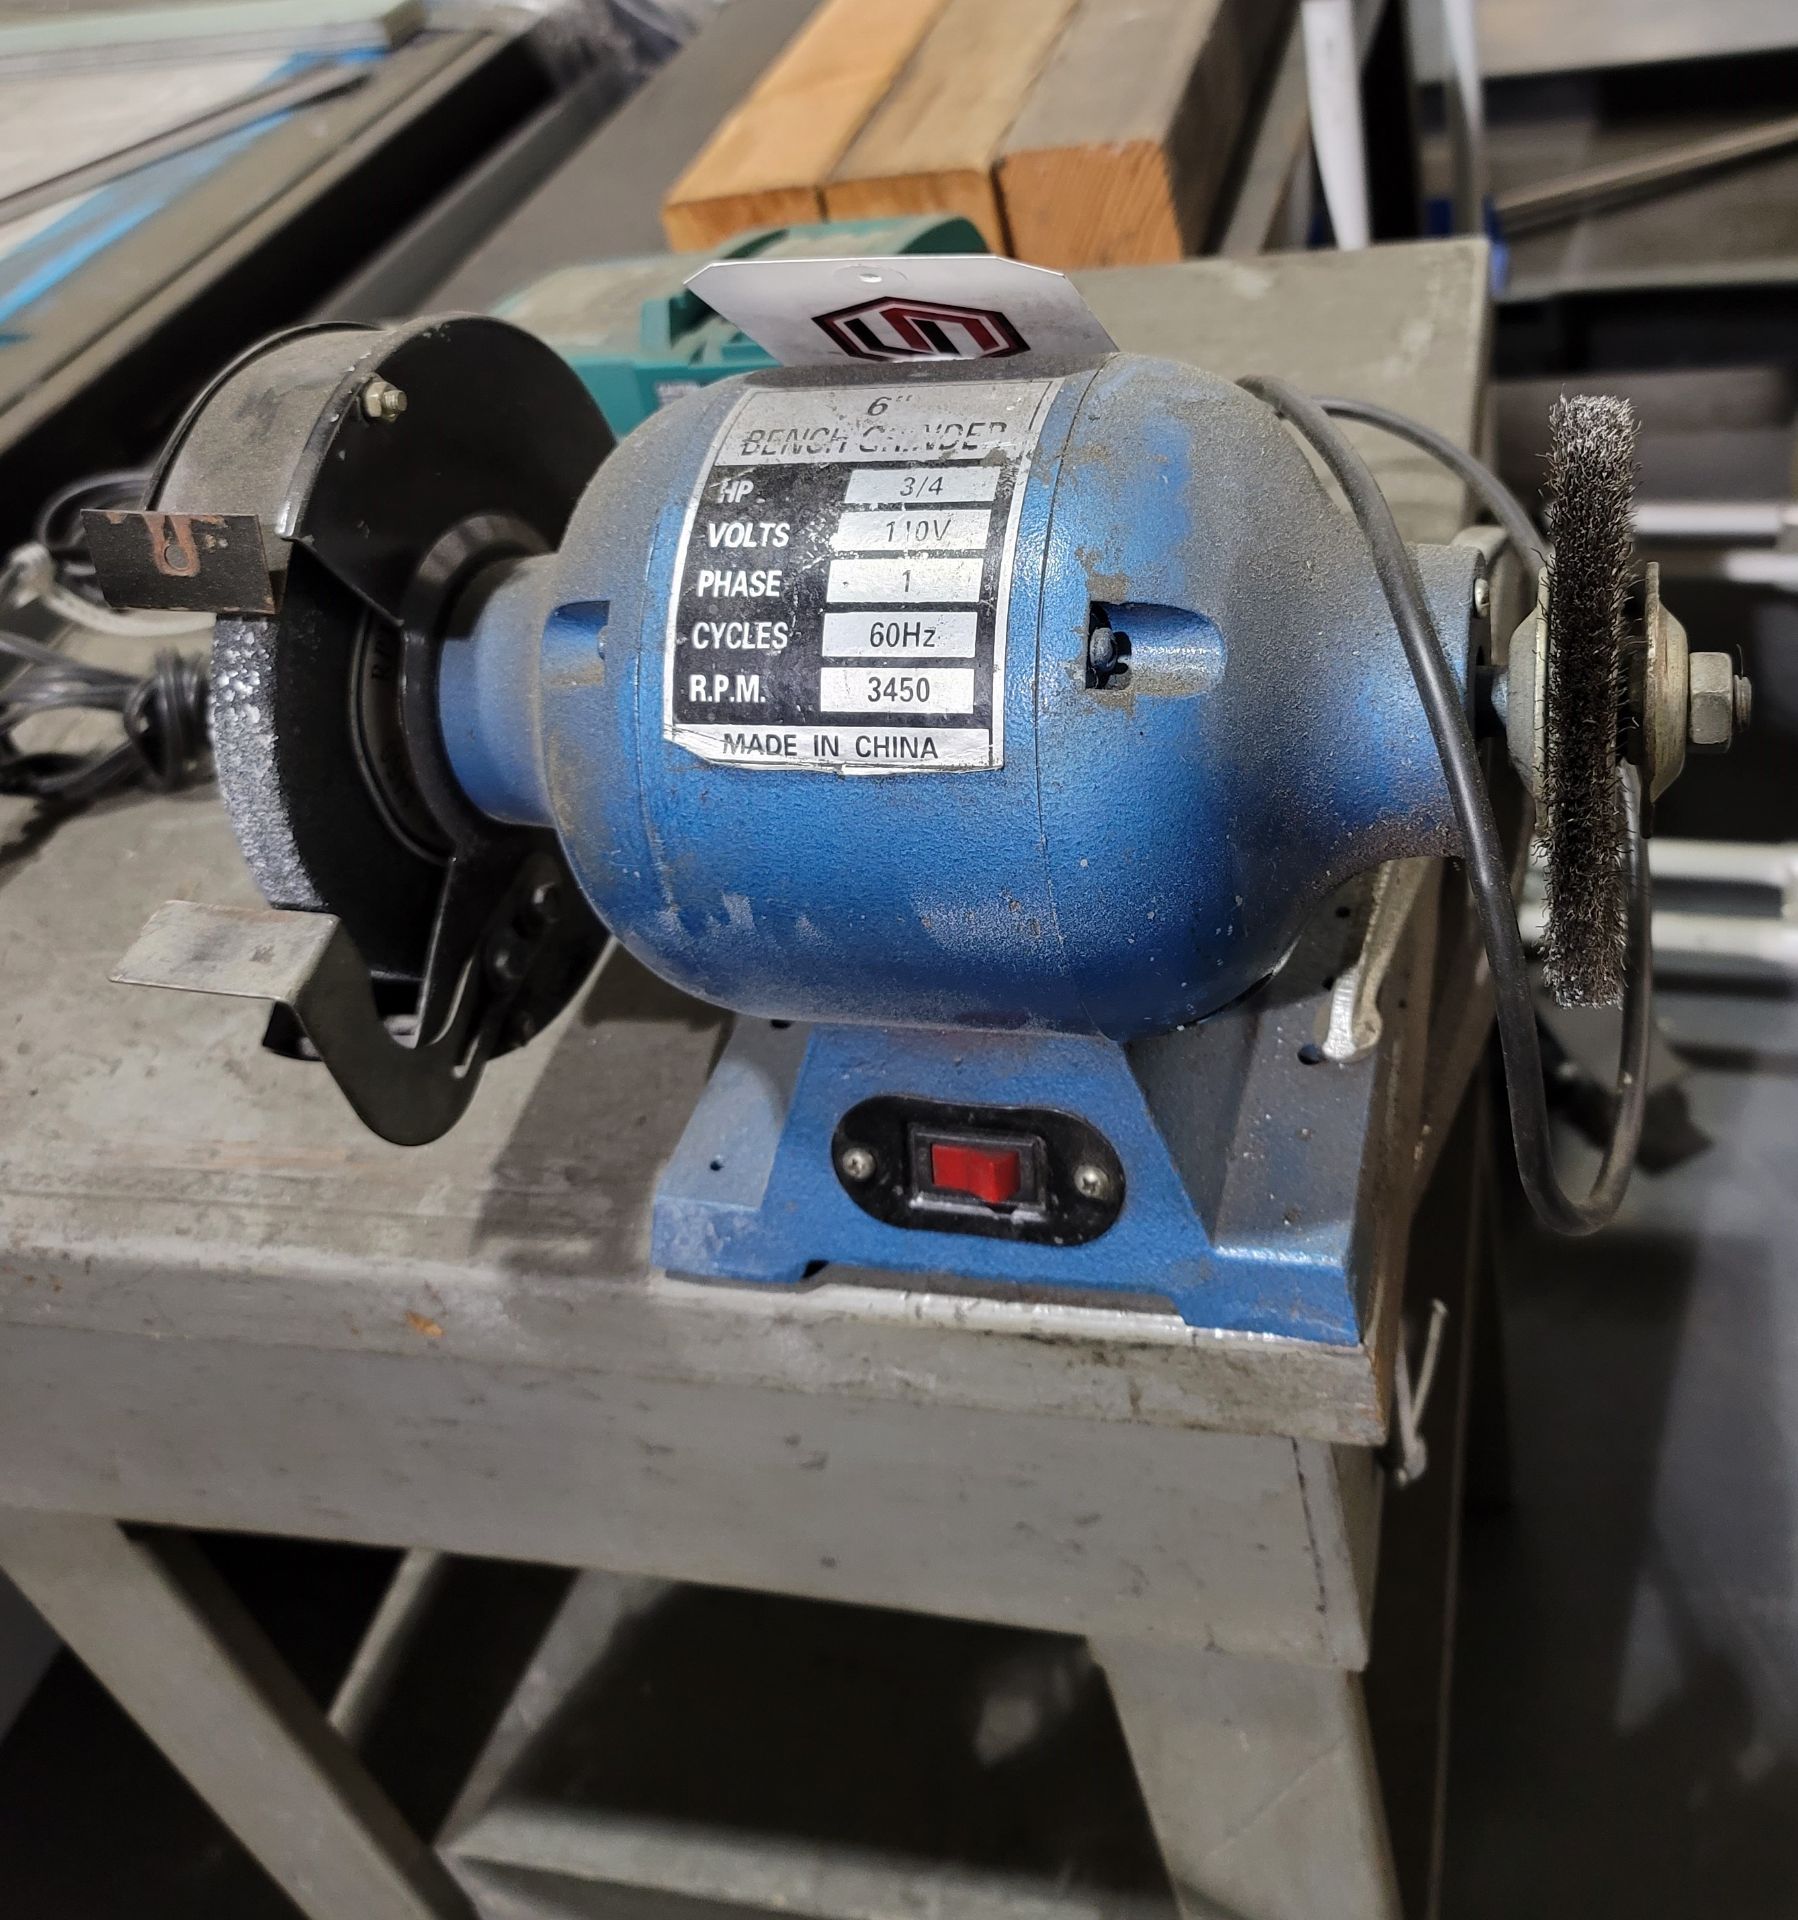 6" DOUBLE END BENCH GRINDER, 3/4 HP, TABLE NOT INCLUDED (LOCATION: BUILDING 10 MACHINE SHOP)